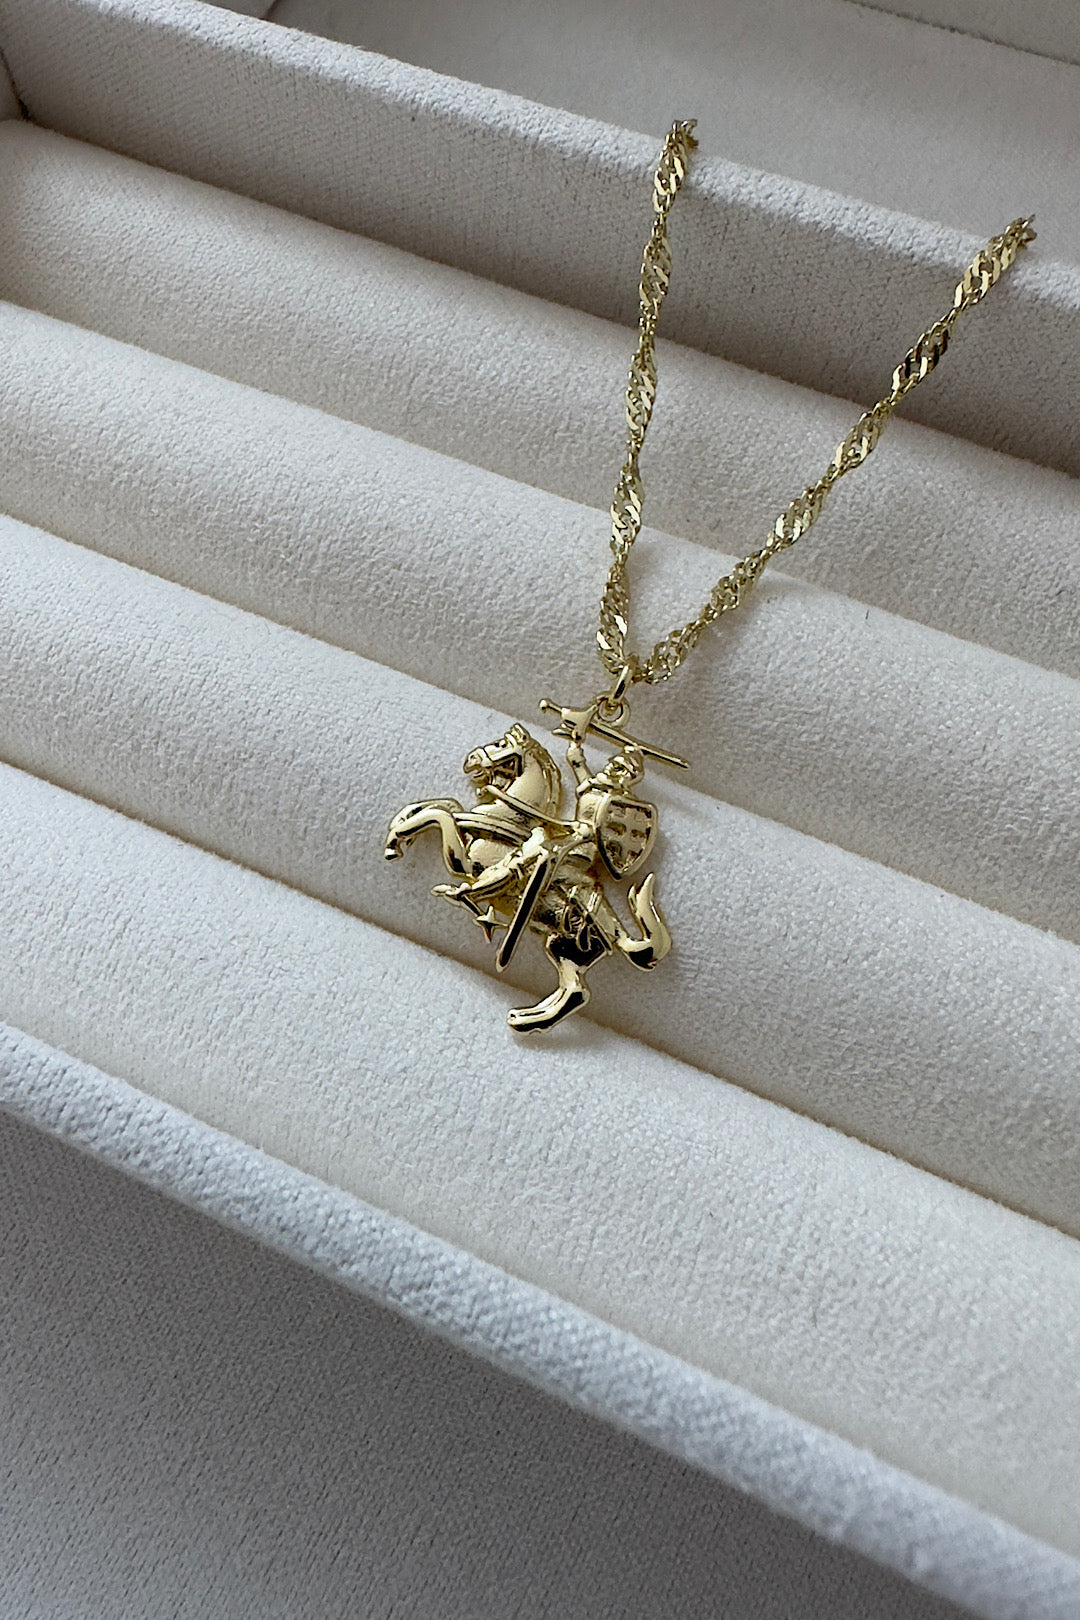 Lithuania Coat of Arms Gold Swirl Necklace 